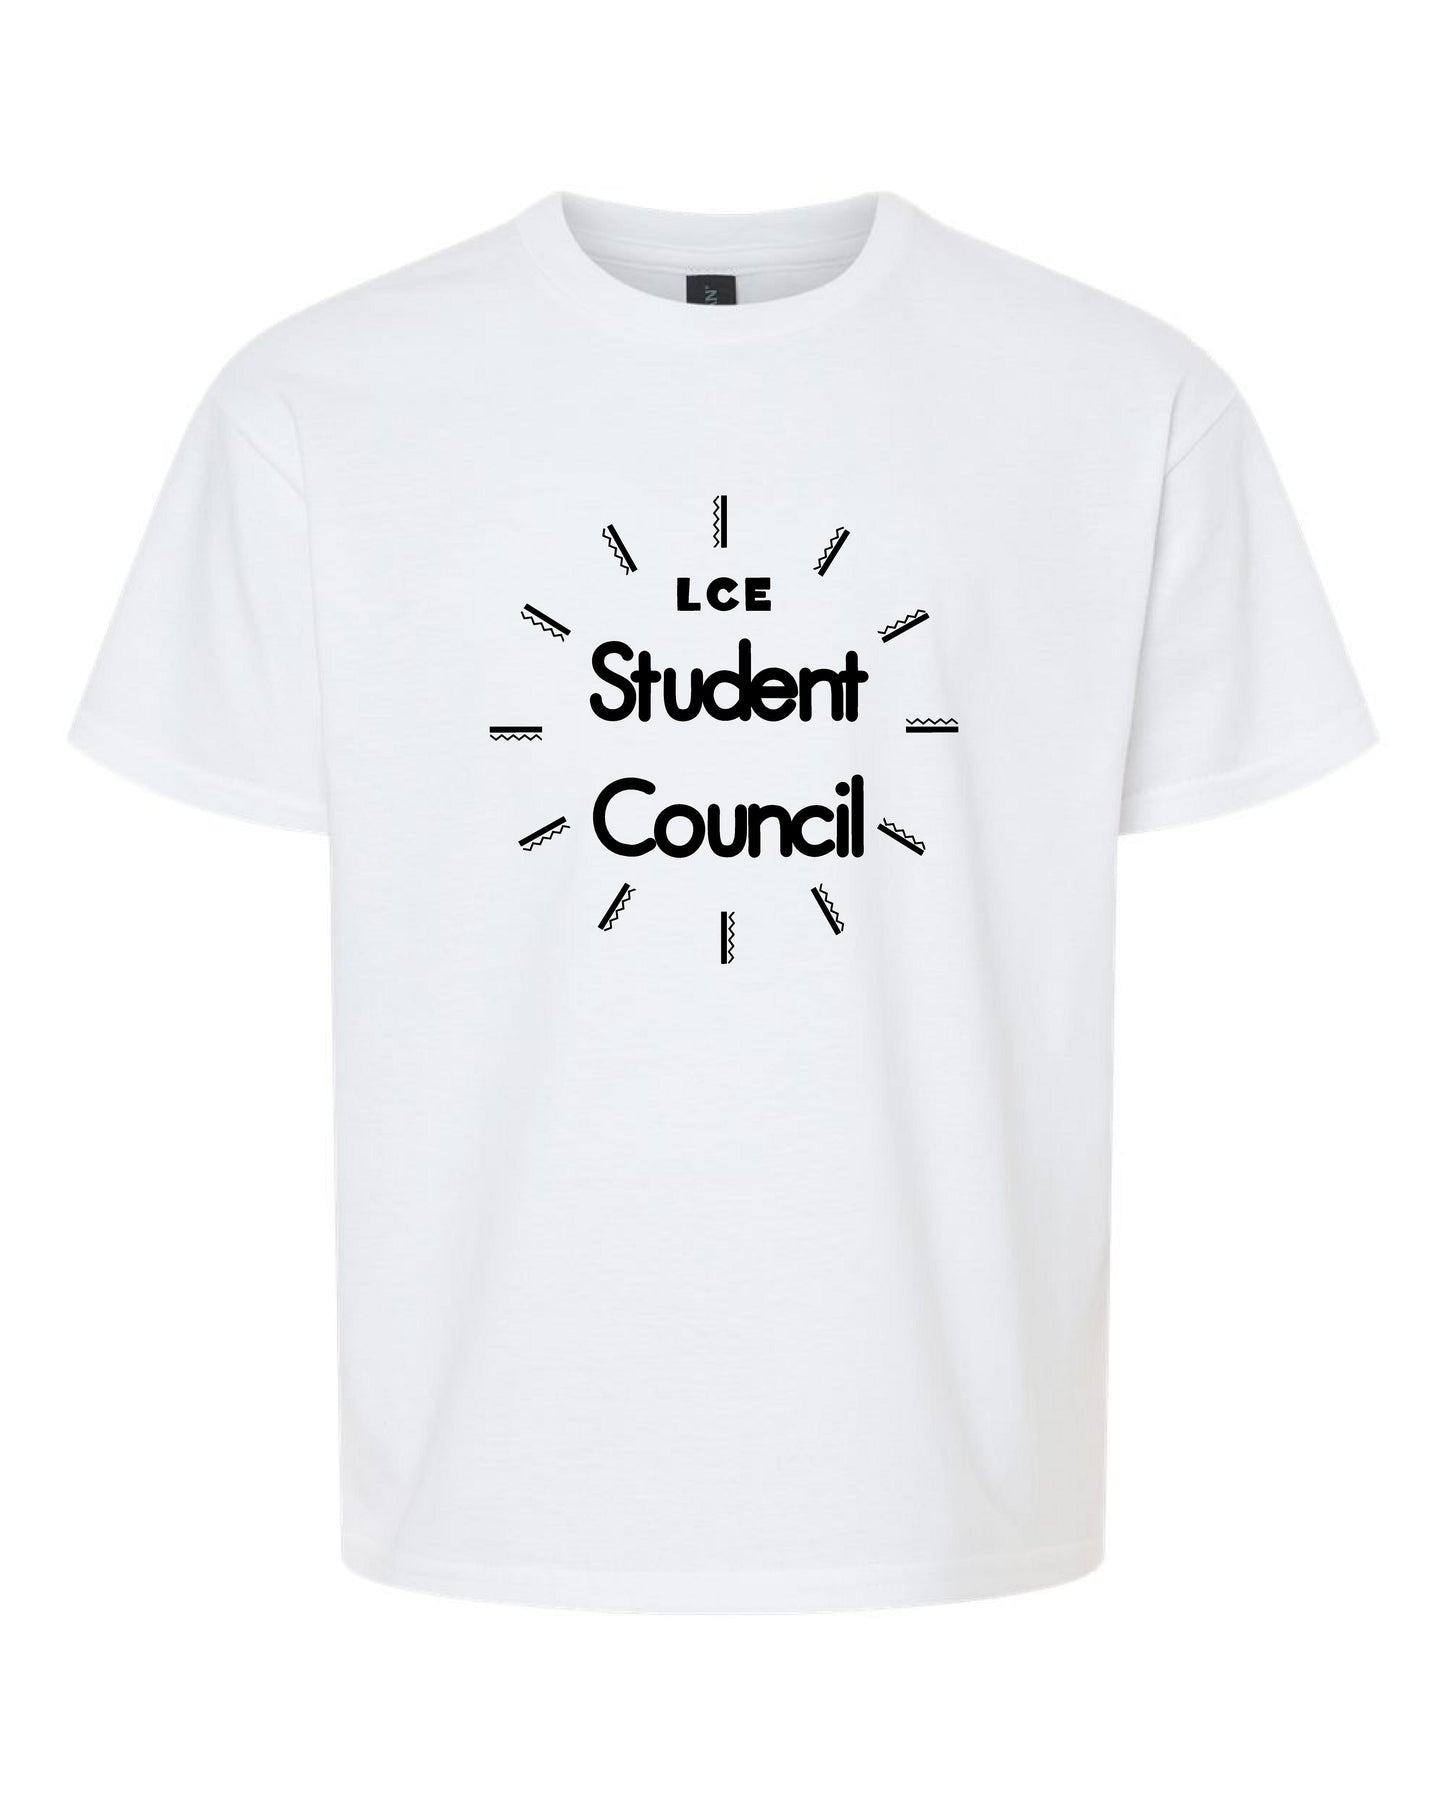 LCE Student Council